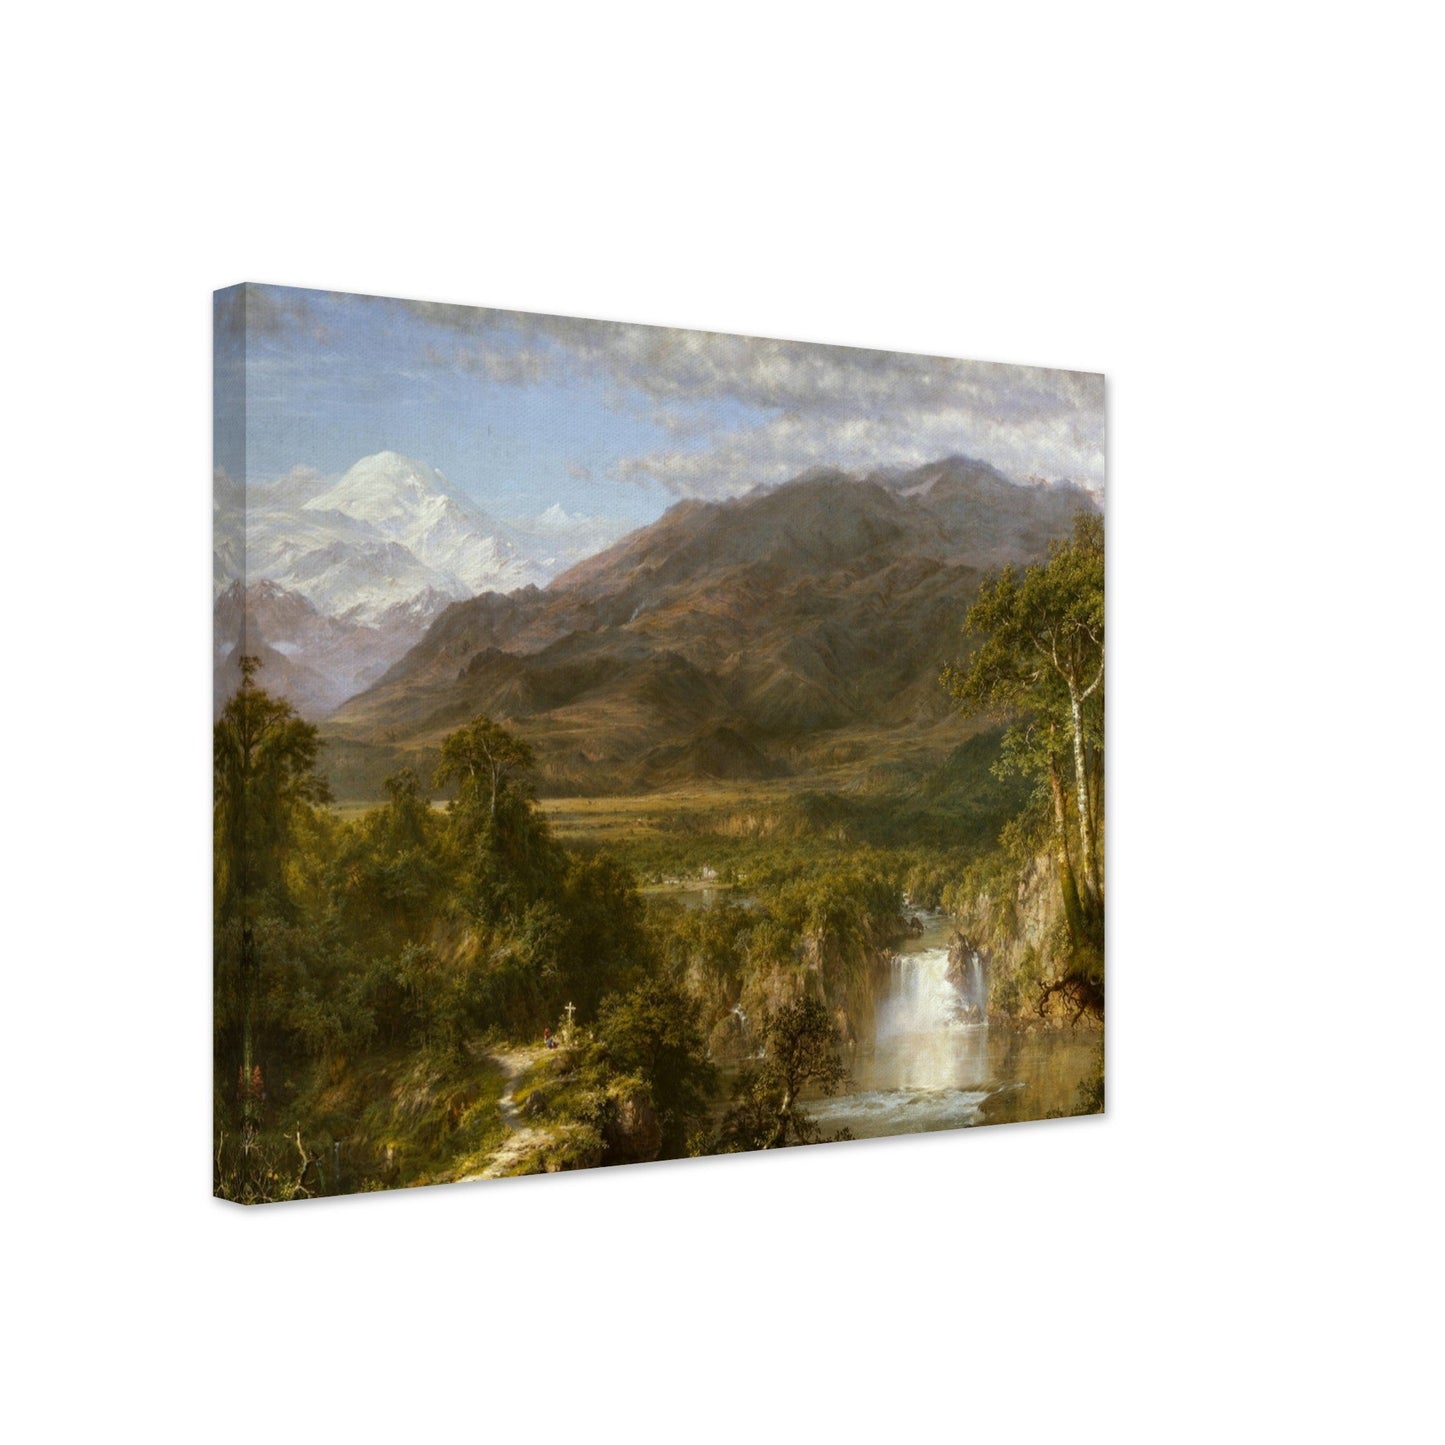 The Heart of the Andes by Frederic by Frederic Edwin Church - Print Material - Master's Gaze